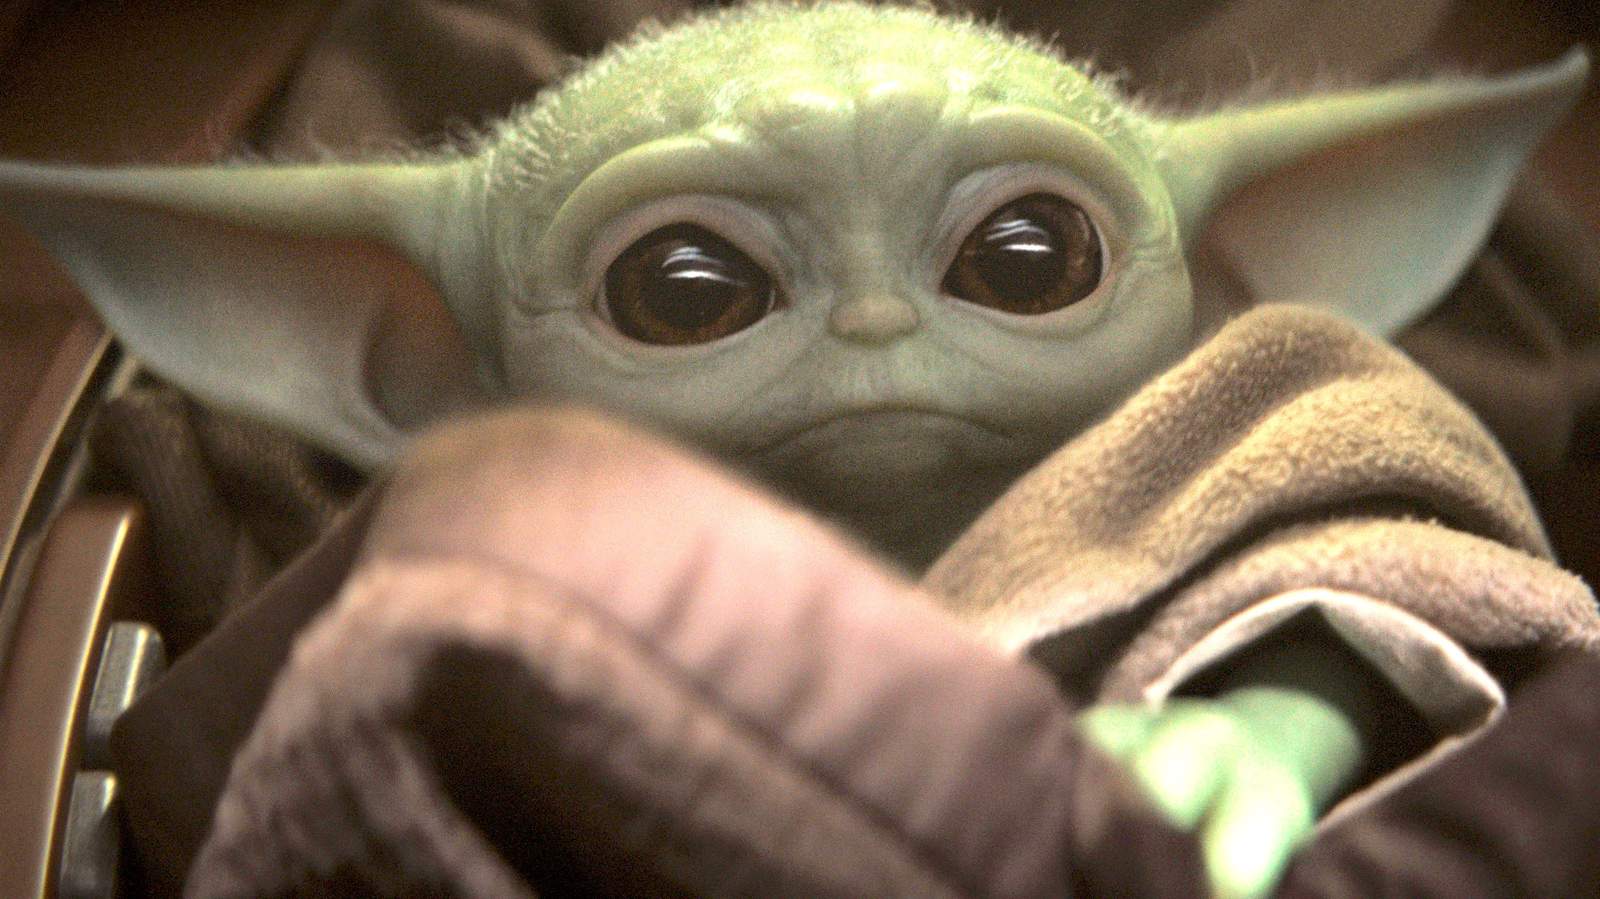 Baby Yoda catches ride on SpaceX Crew Dragon into orbit with astronauts